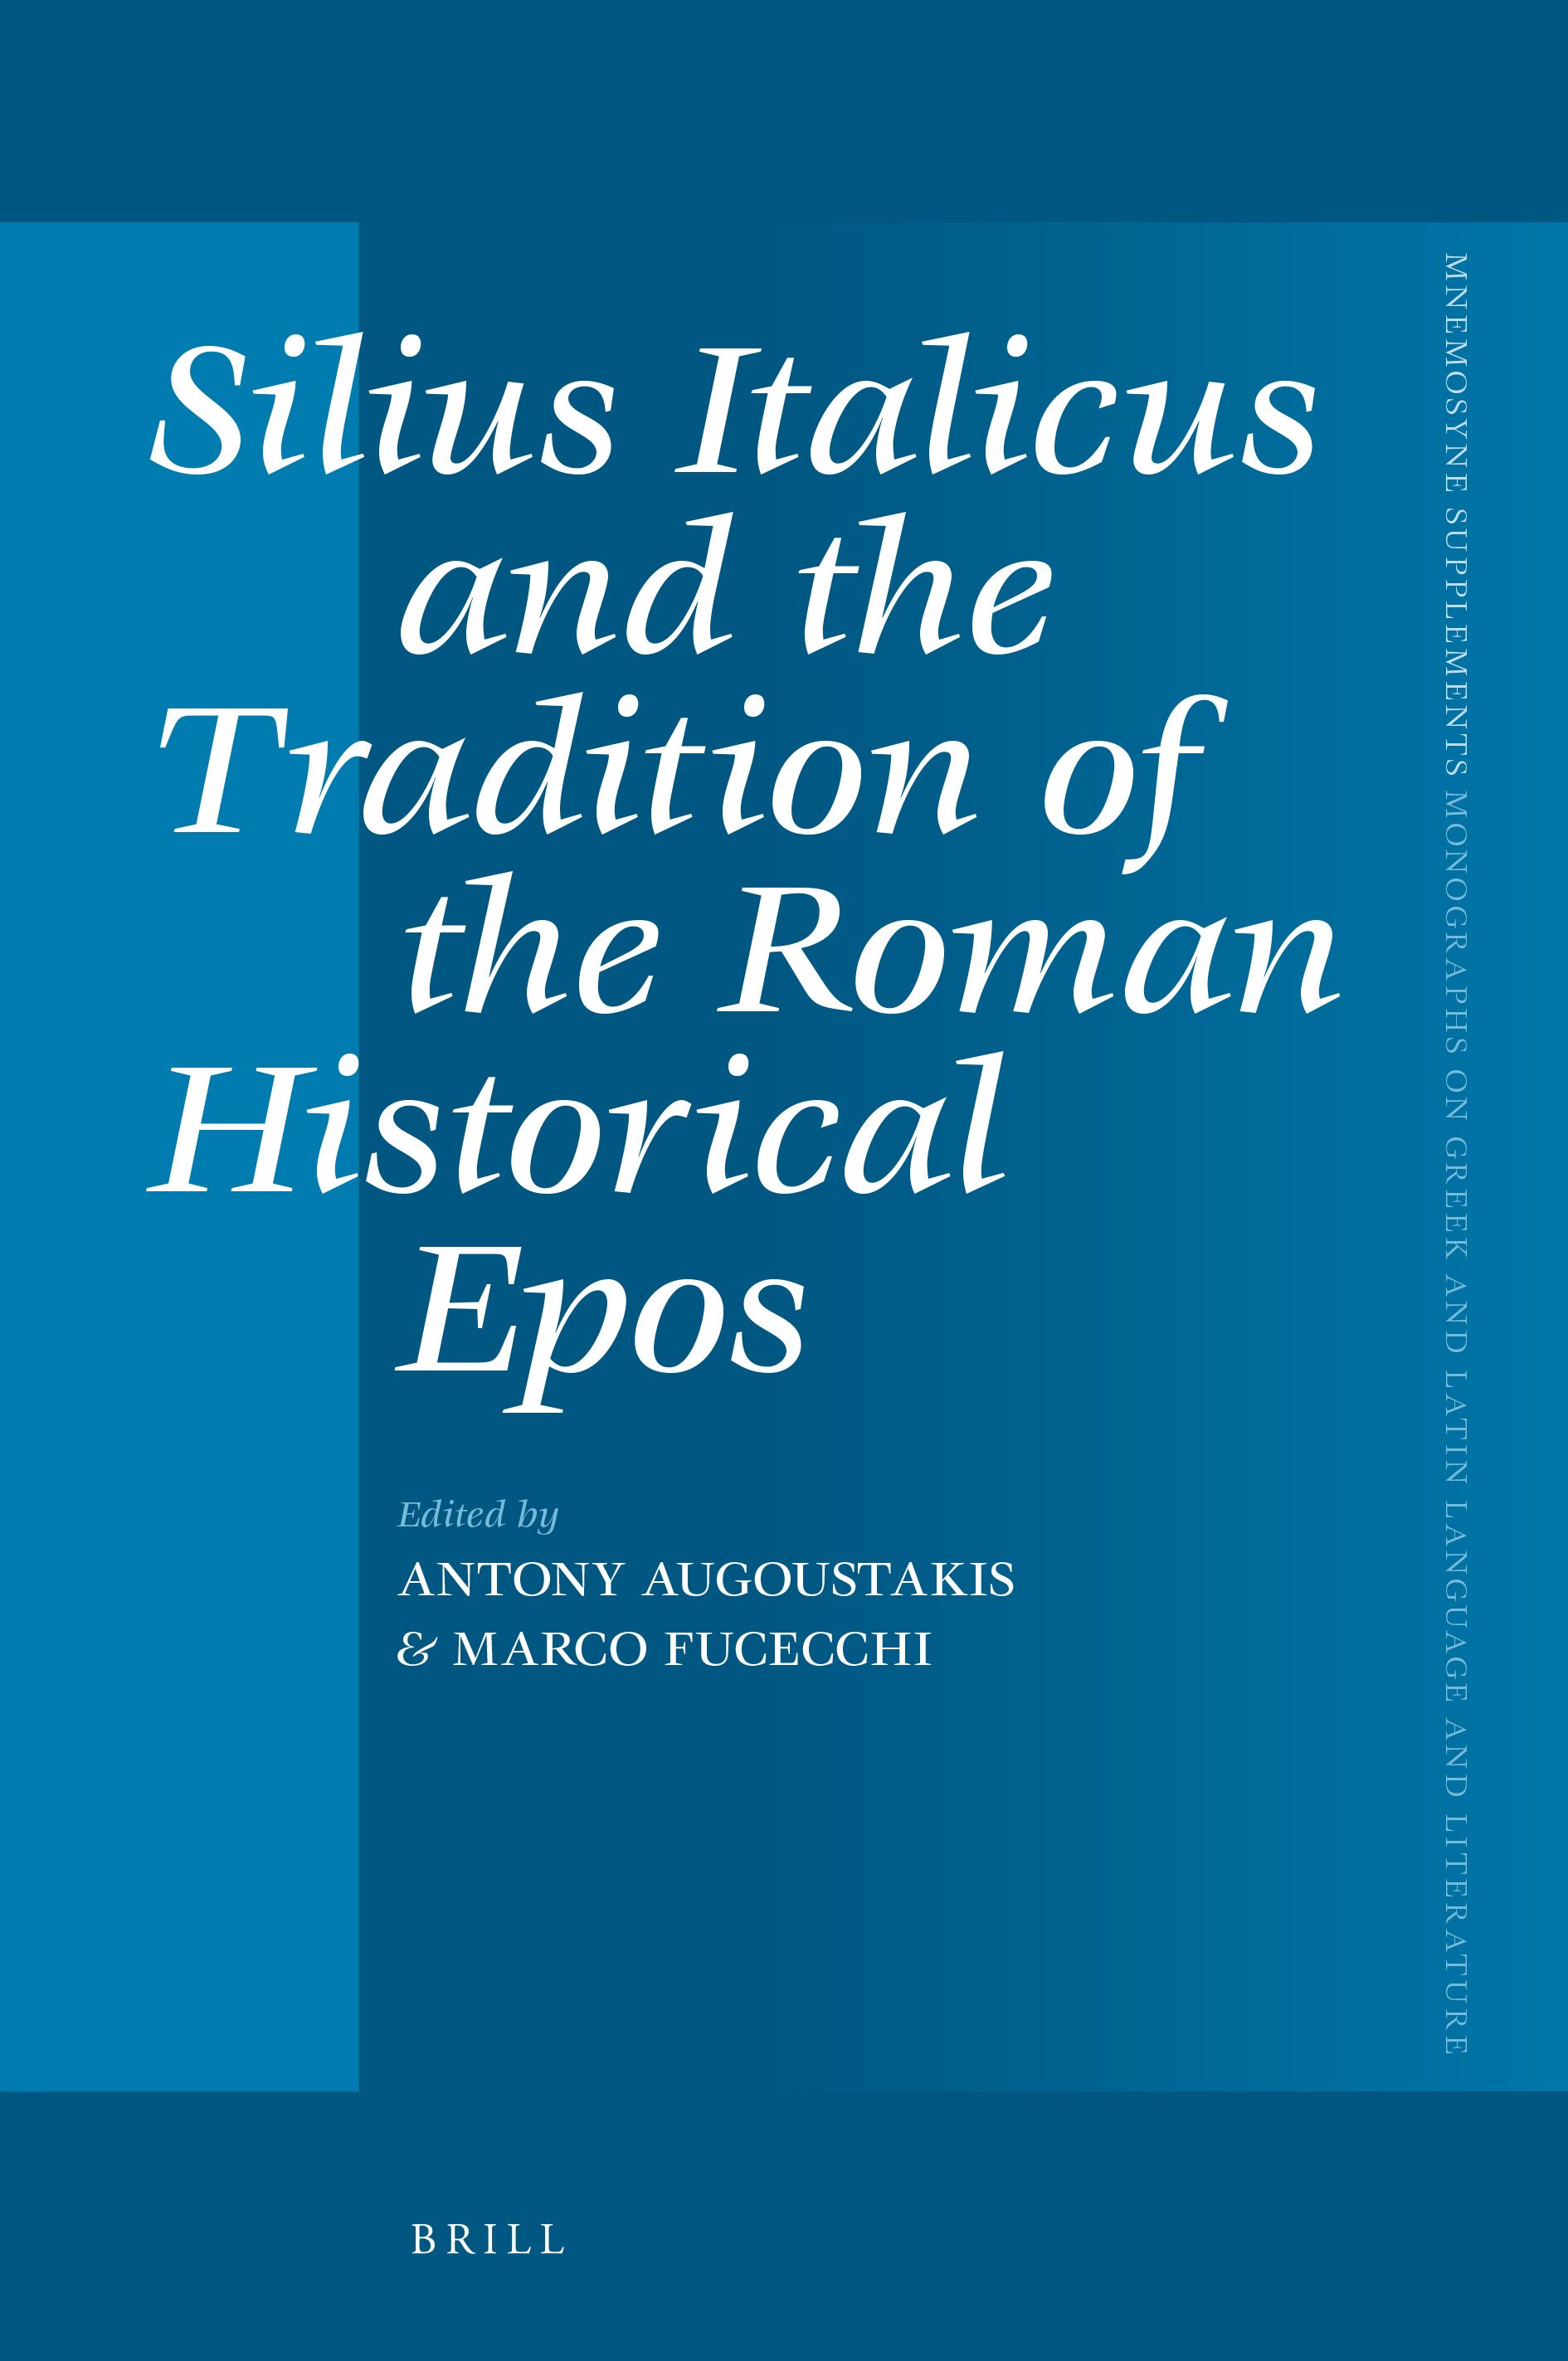 Book cover for, "Silius Italicus and the Tradition of the Roman Historical Epos"